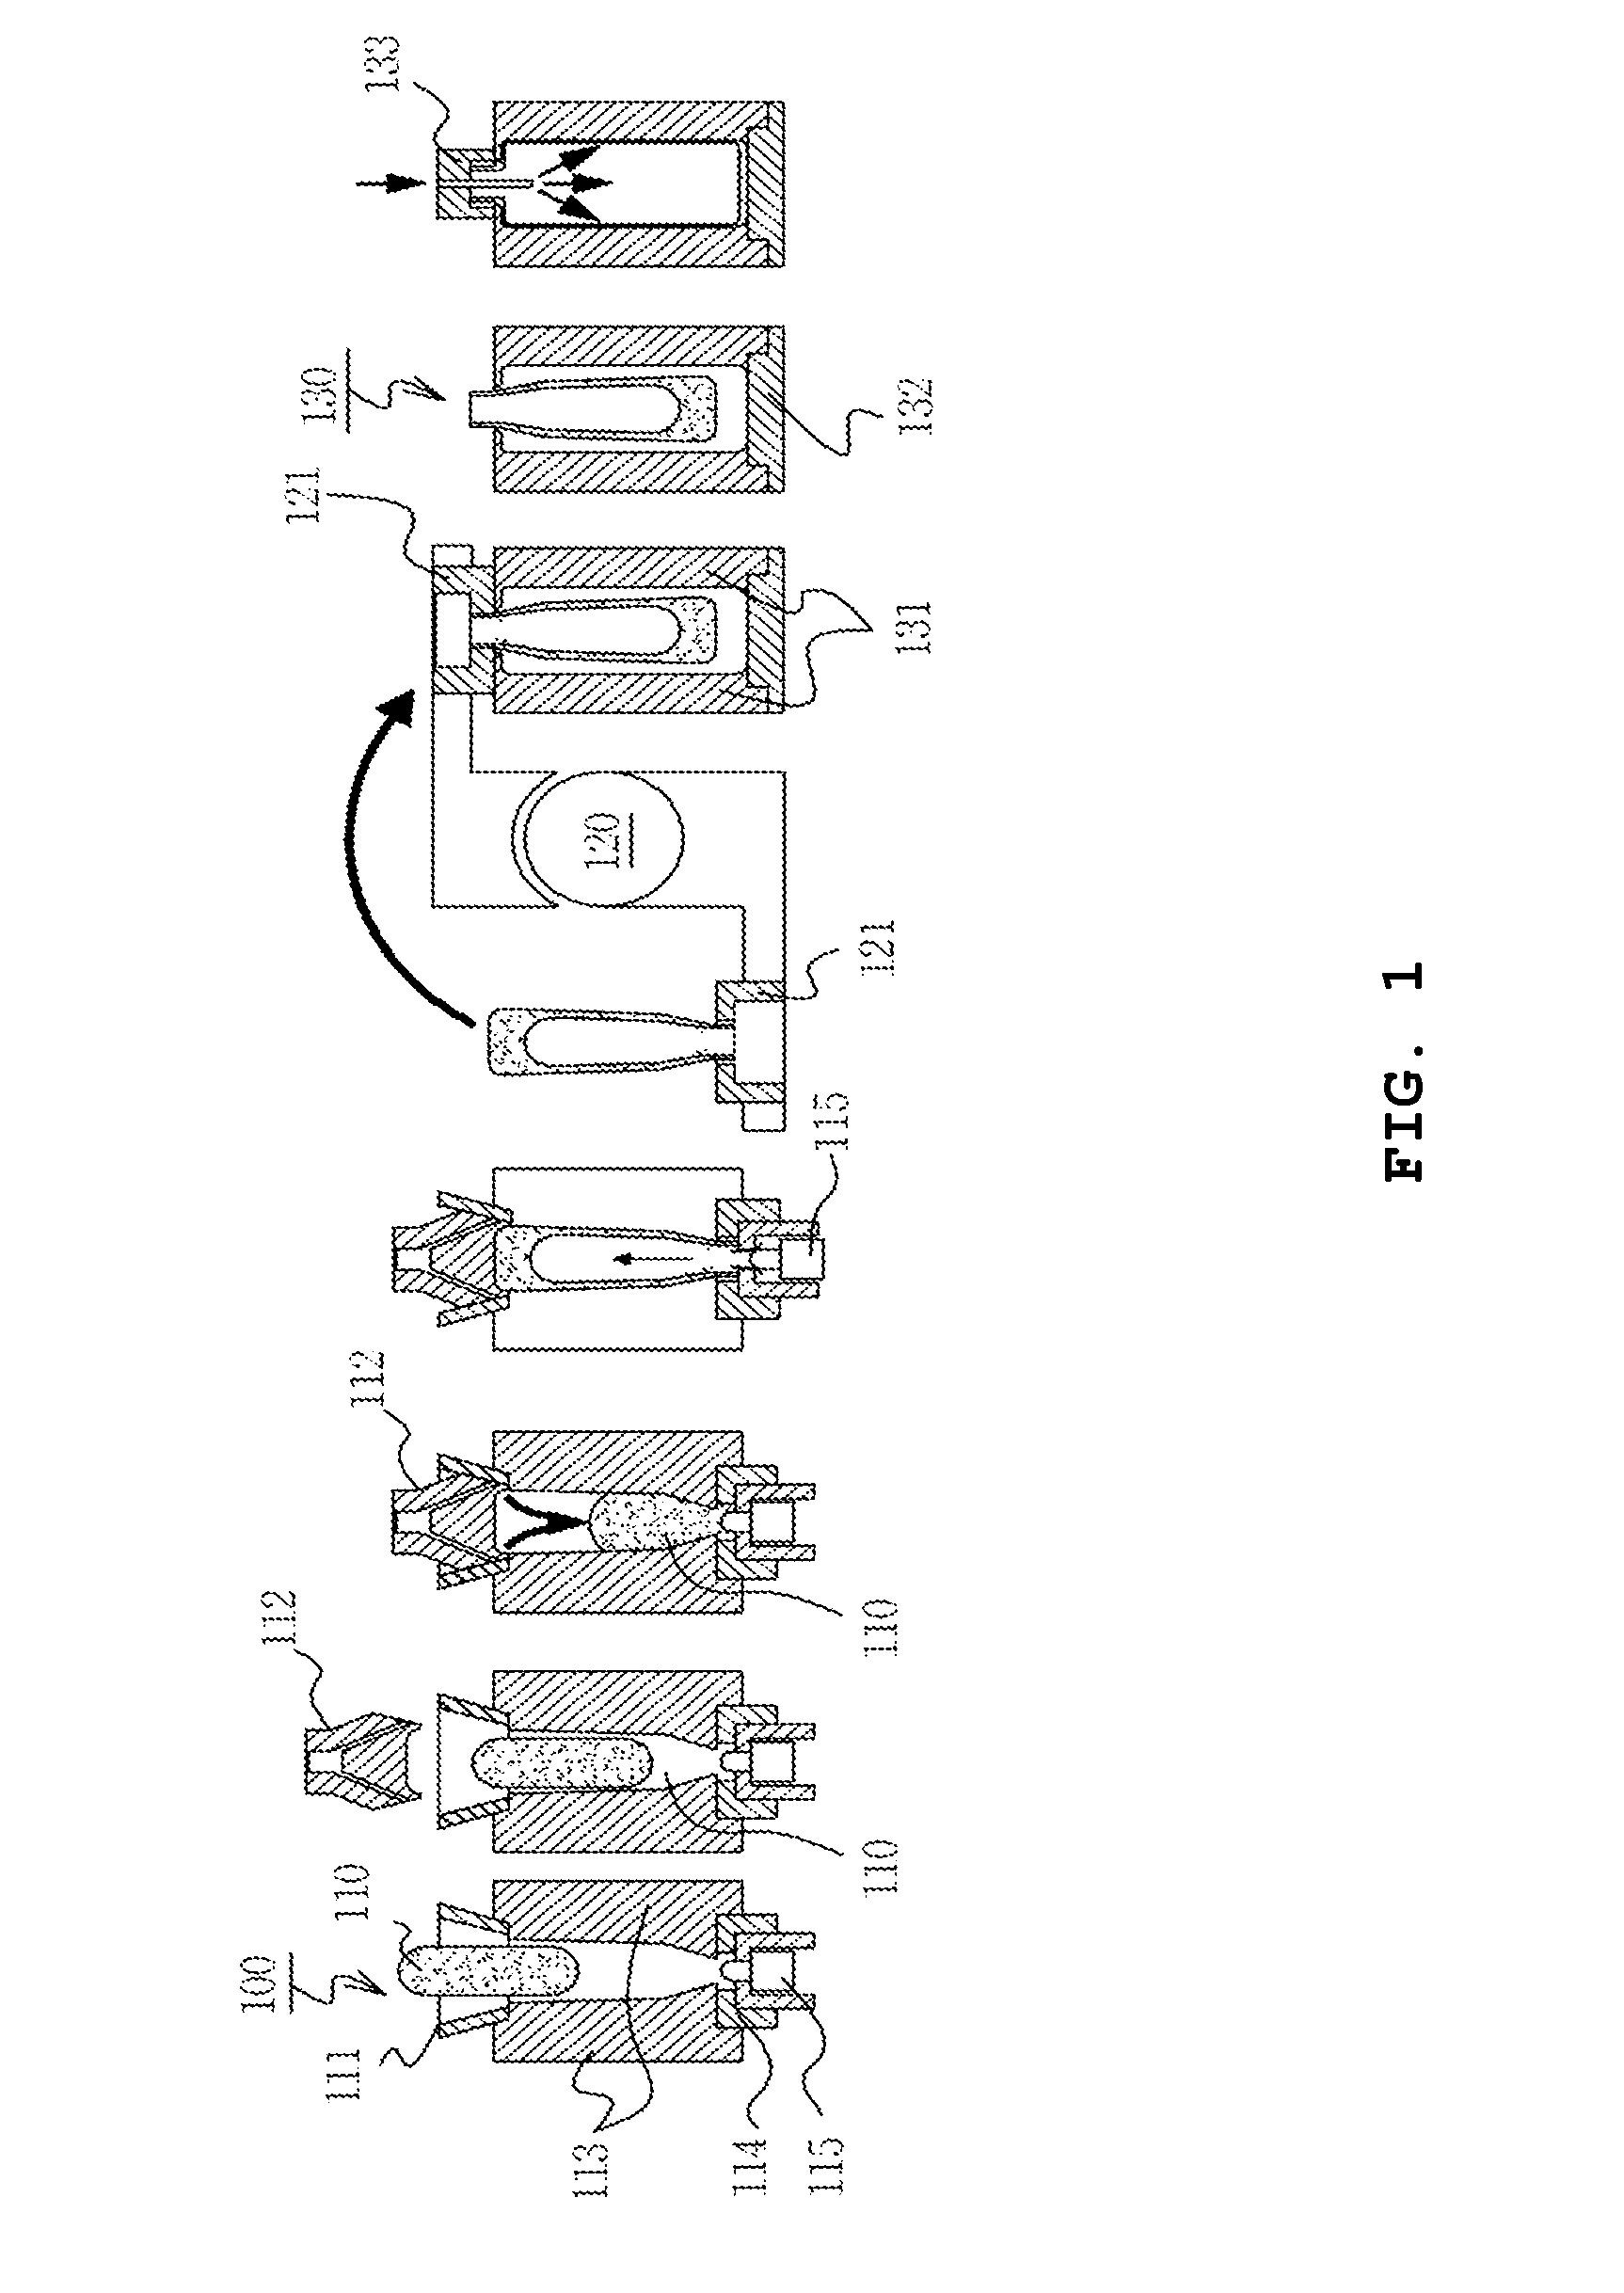 Apparatus for blow molding glass bottle, and molding method therefor